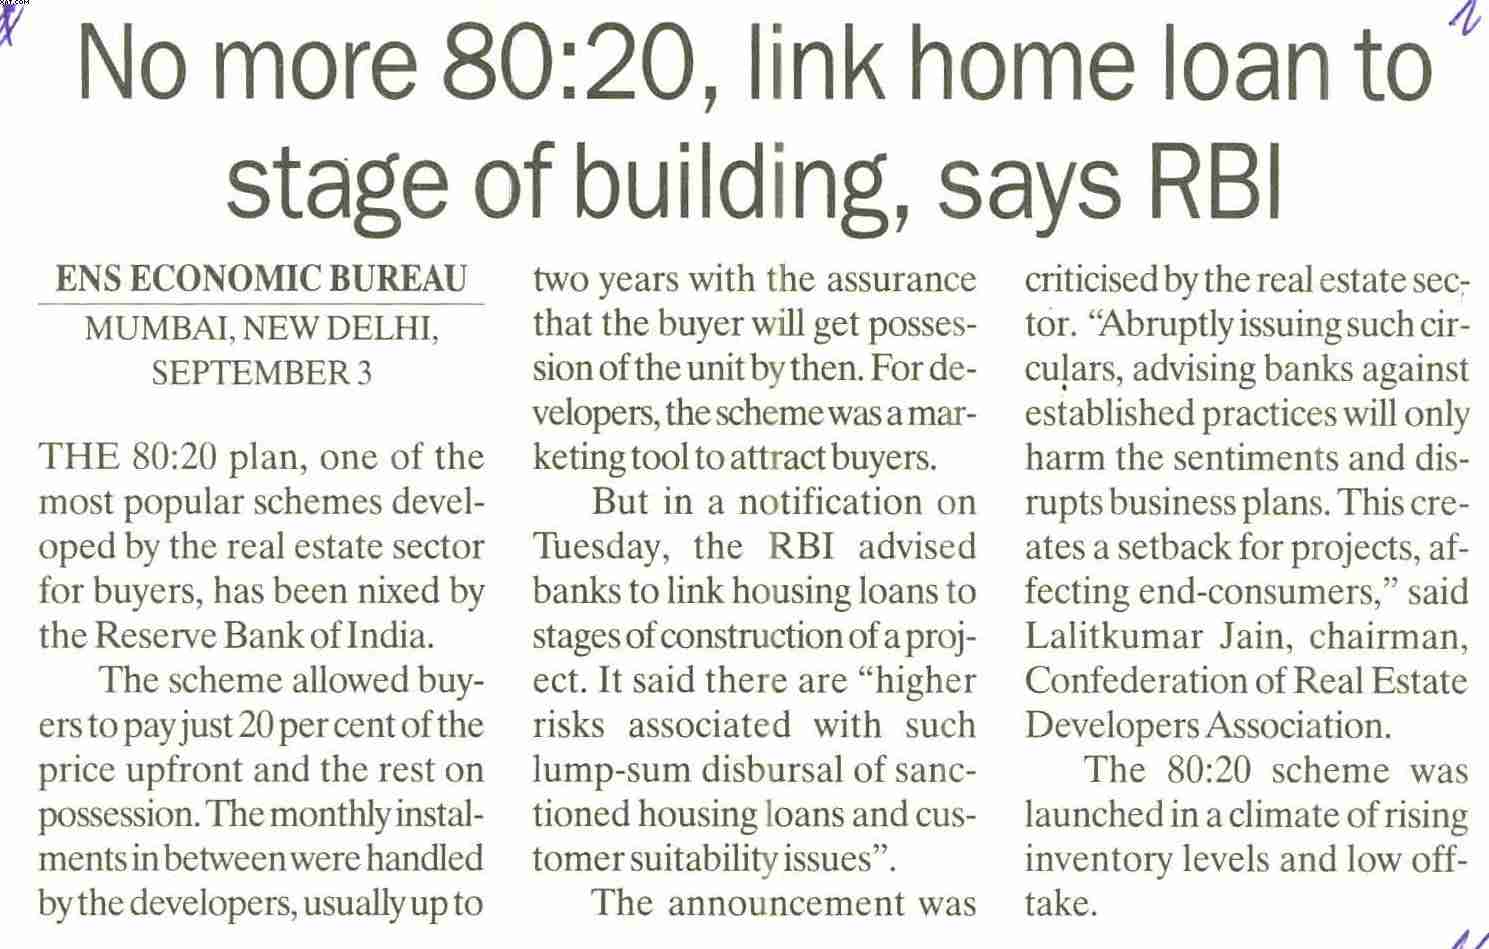 No more 80:20, link hoke loan to stage of building, says RBI